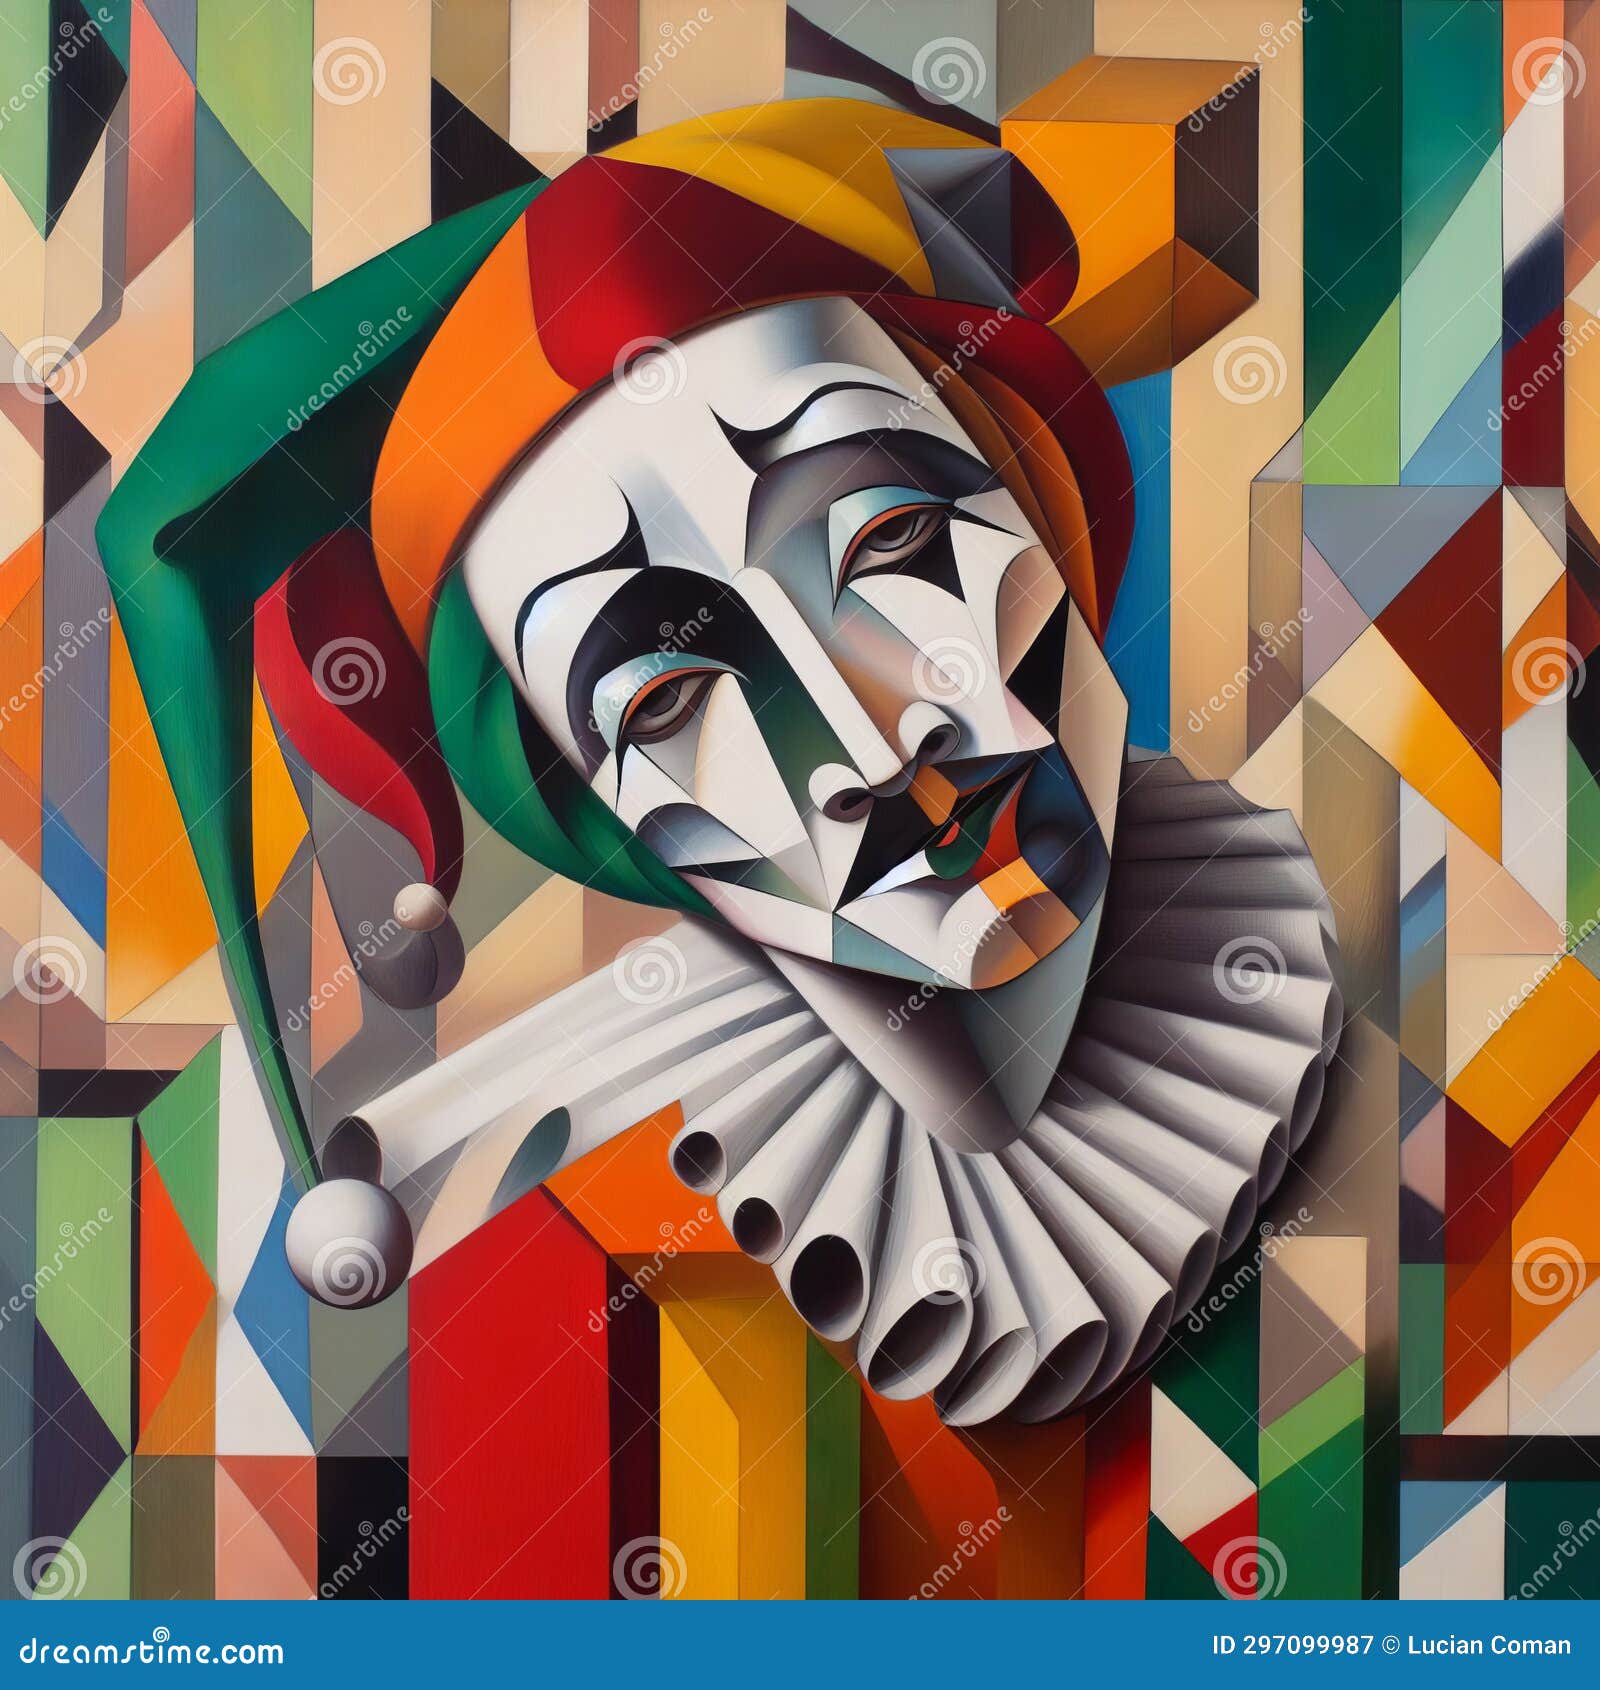 arlequin with a sad face modern painting, geometric patterns